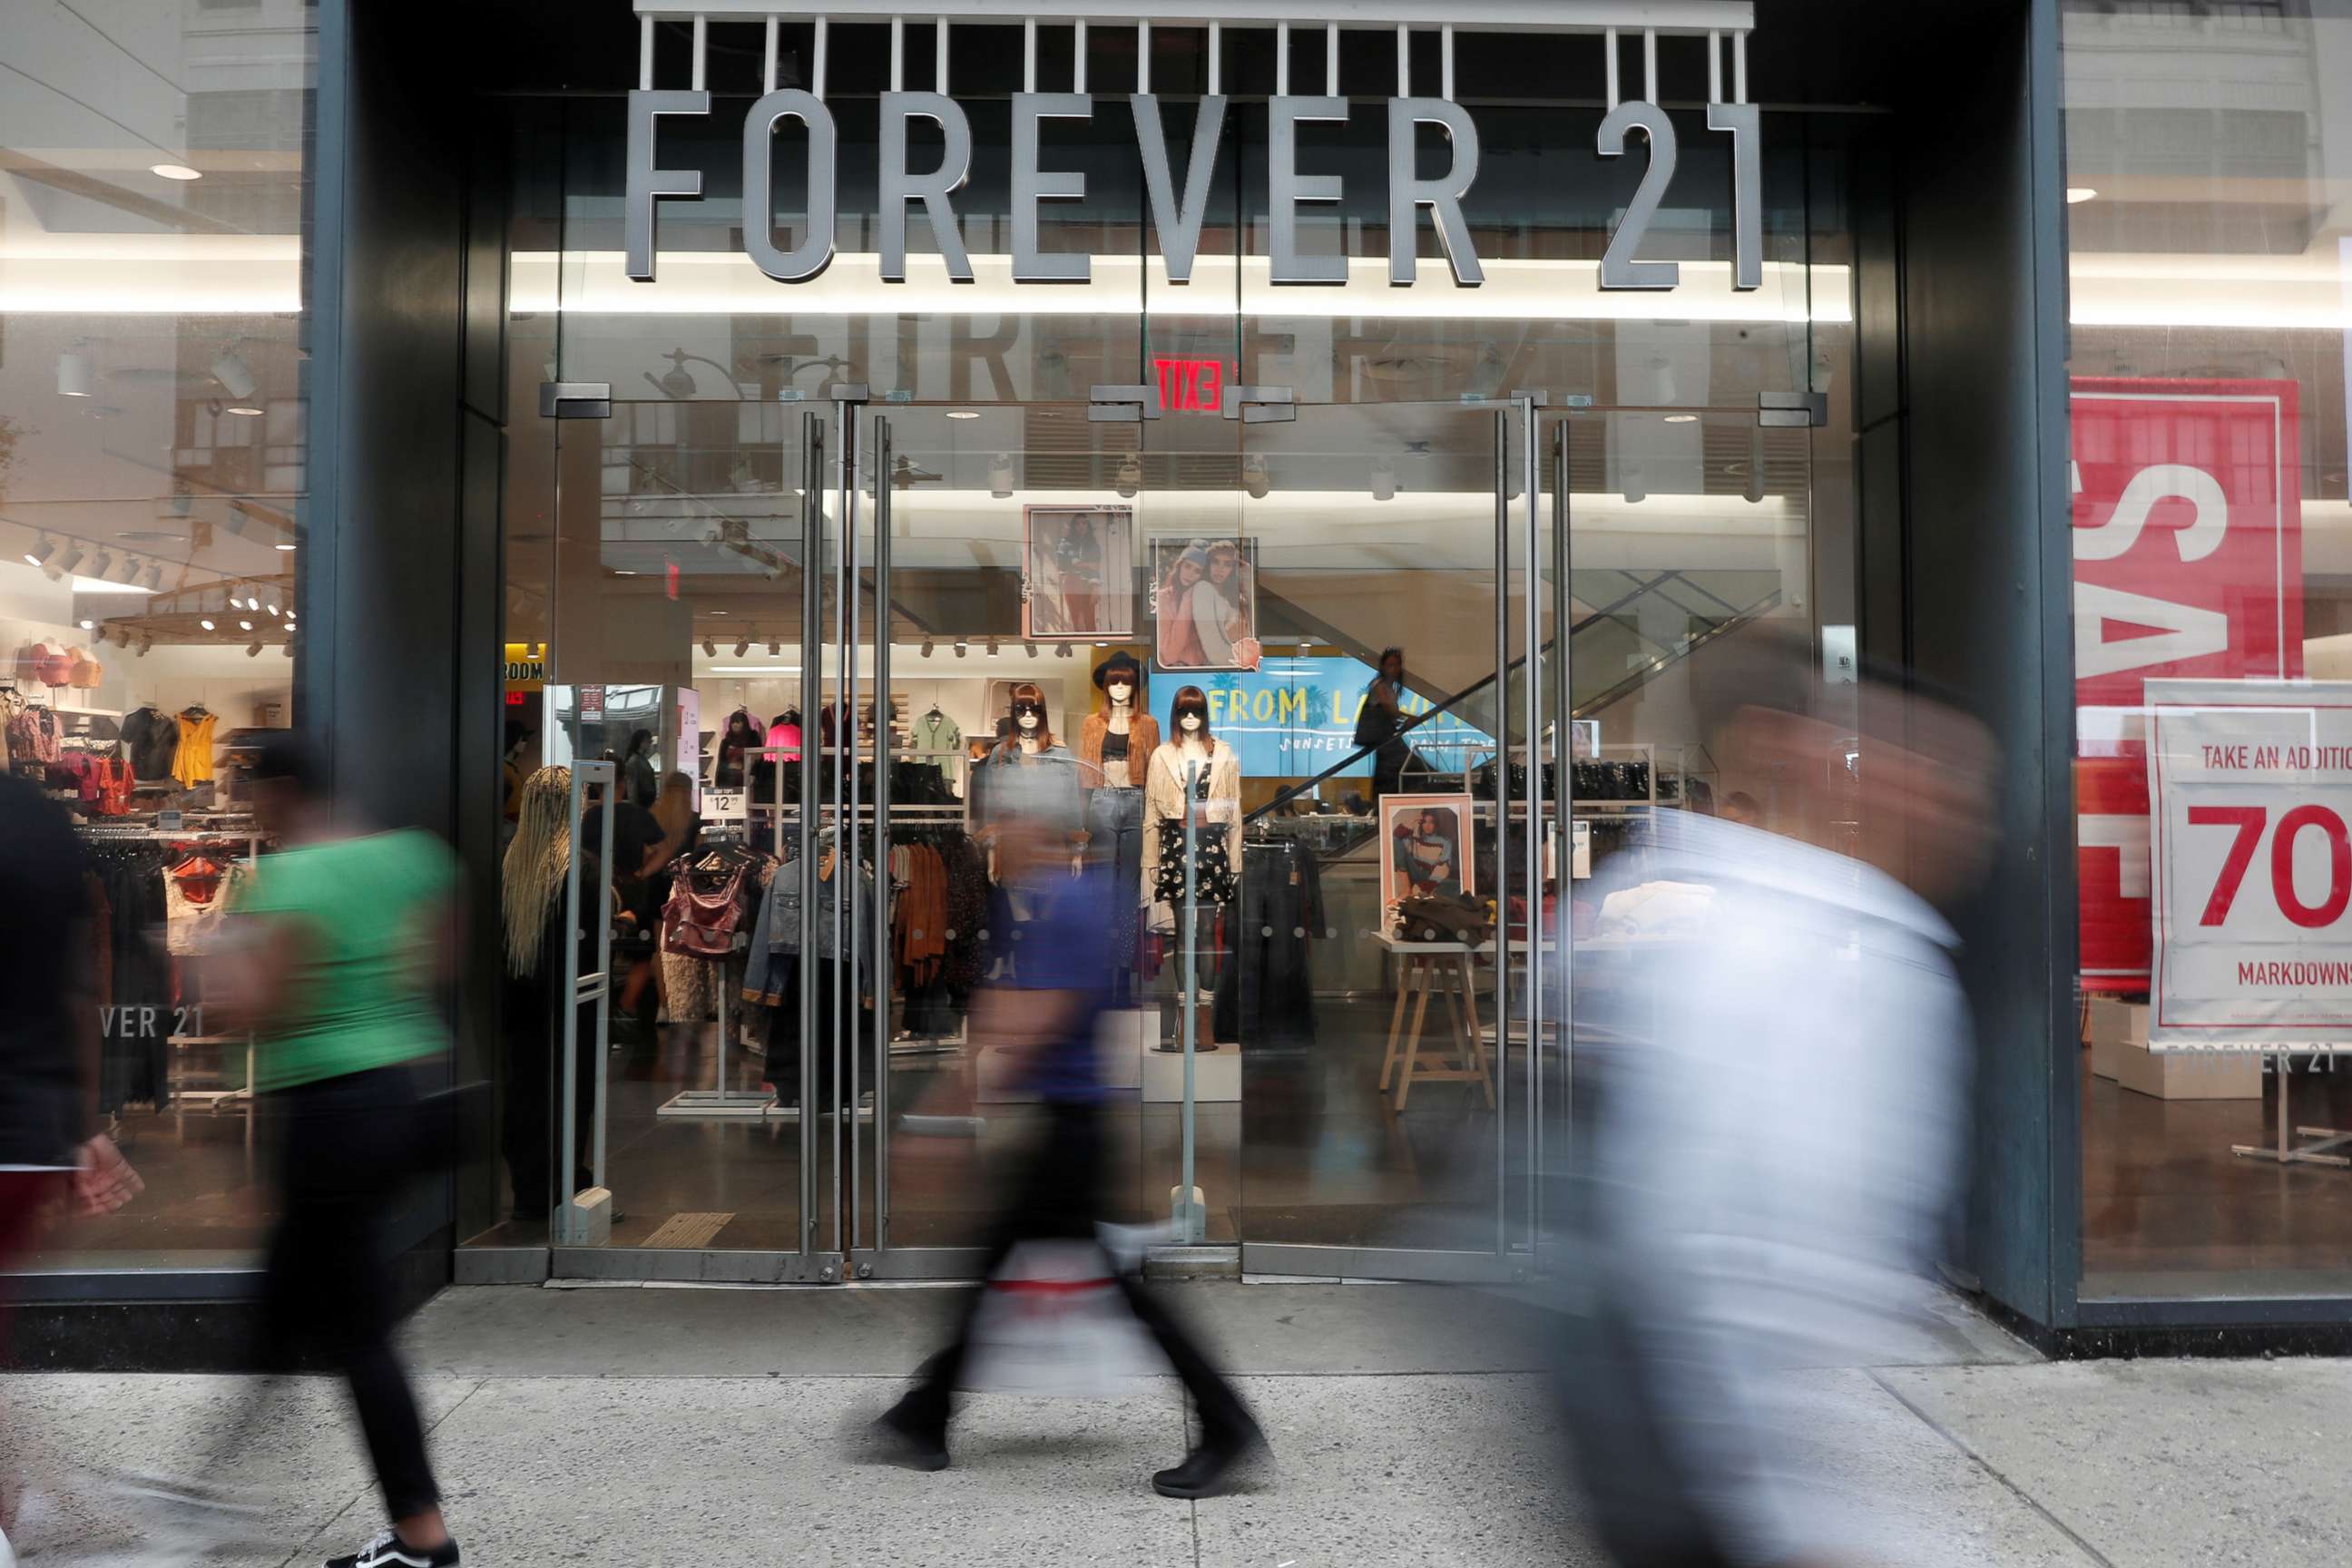 PHOTO: People walk by the clothing retailer Forever 21 in New York City, Sept. 12, 2019.